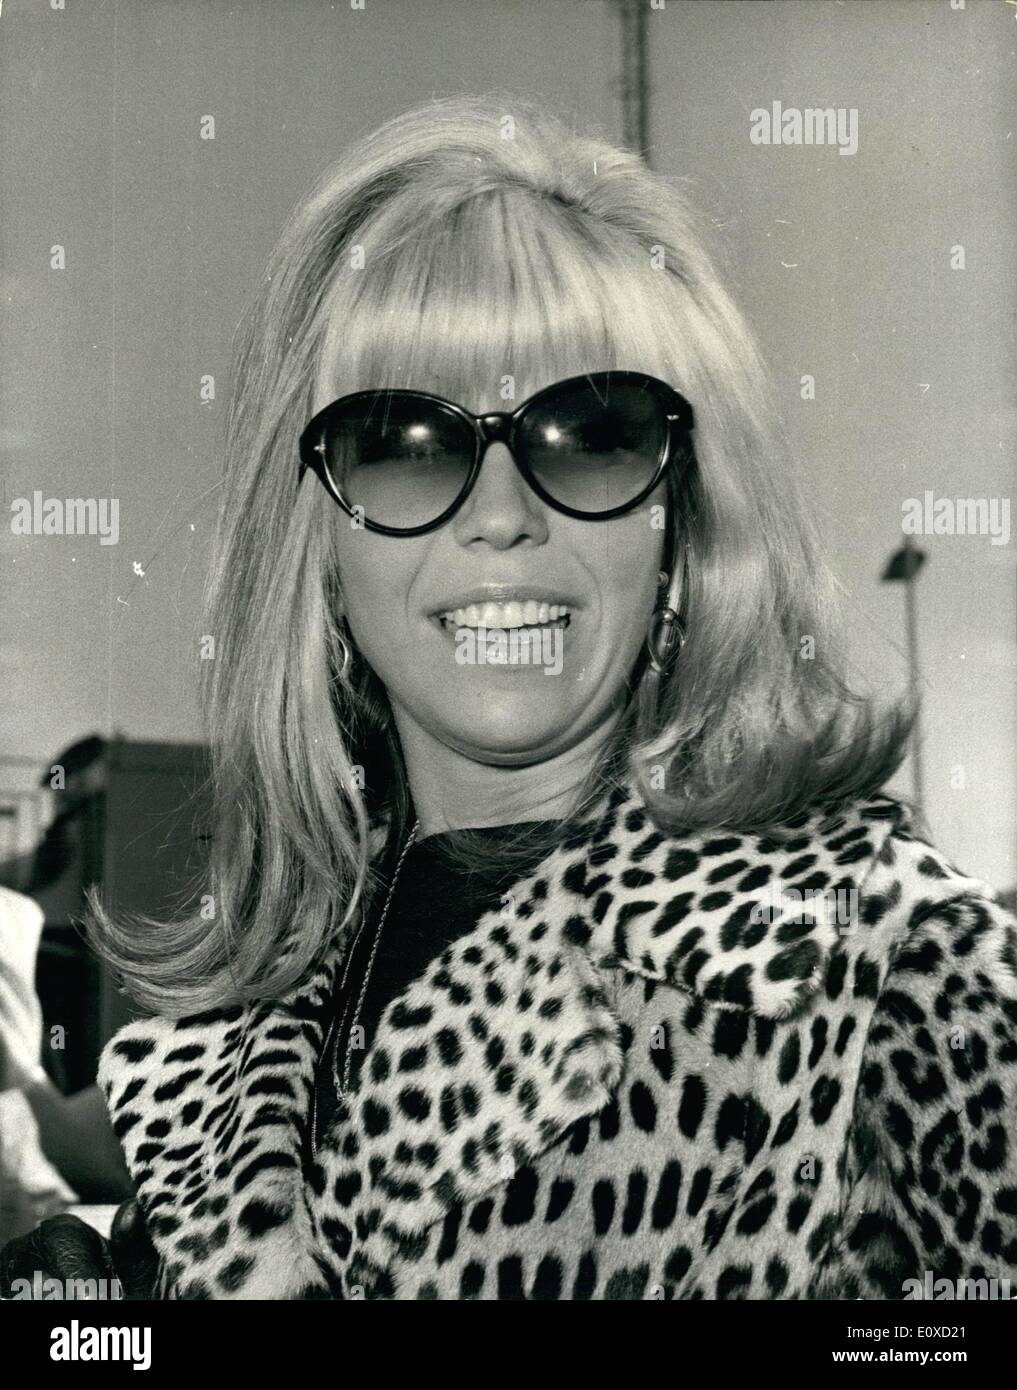 Apr. 21, 1966 - 21-4-66 Nancy Sinatra arrives. Miss Nancy Sinatra arrived at London Airport today for her first visit to Britain. During her stay she will appear on television, record a new album in Pye's Marble Arch Studios, and promote her latest single How Does That Grab You, Darlin'? Nancy first shot to international fame earlier this year when her recording of These Boots are made for Walking topped both the American and the British charts. Keystone Photo Shows: Miss Nancy Sinatra picture on her arrival at London Airport today. Stock Photo